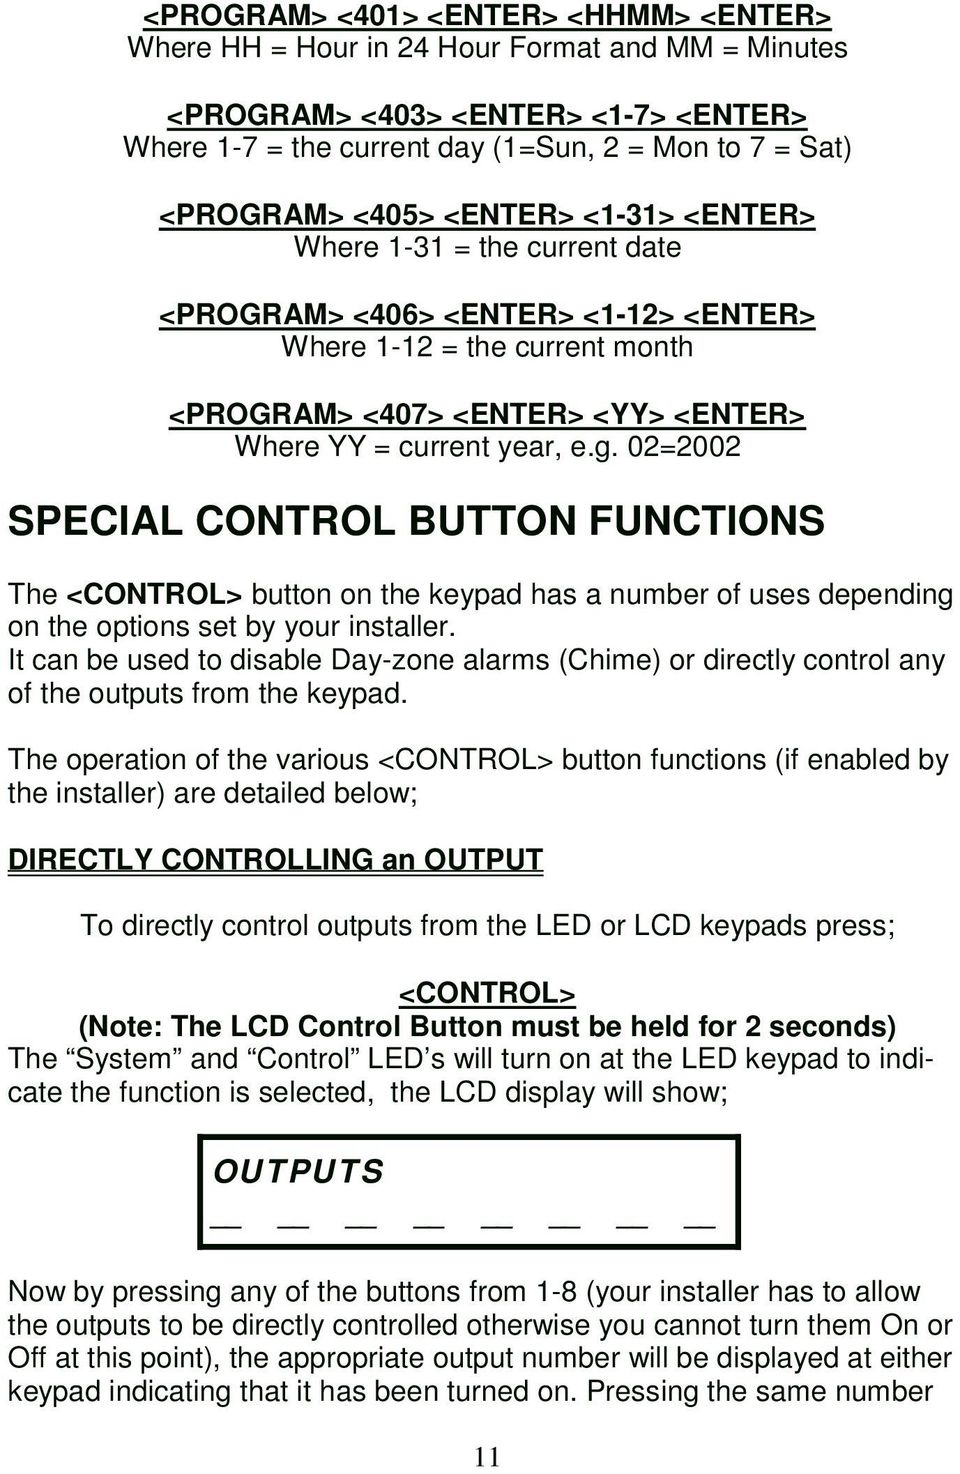 02=2002 SPECIAL CONTROL BUTTON FUNCTIONS The <CONTROL> button on the keypad has a number of uses depending on the options set by your installer.